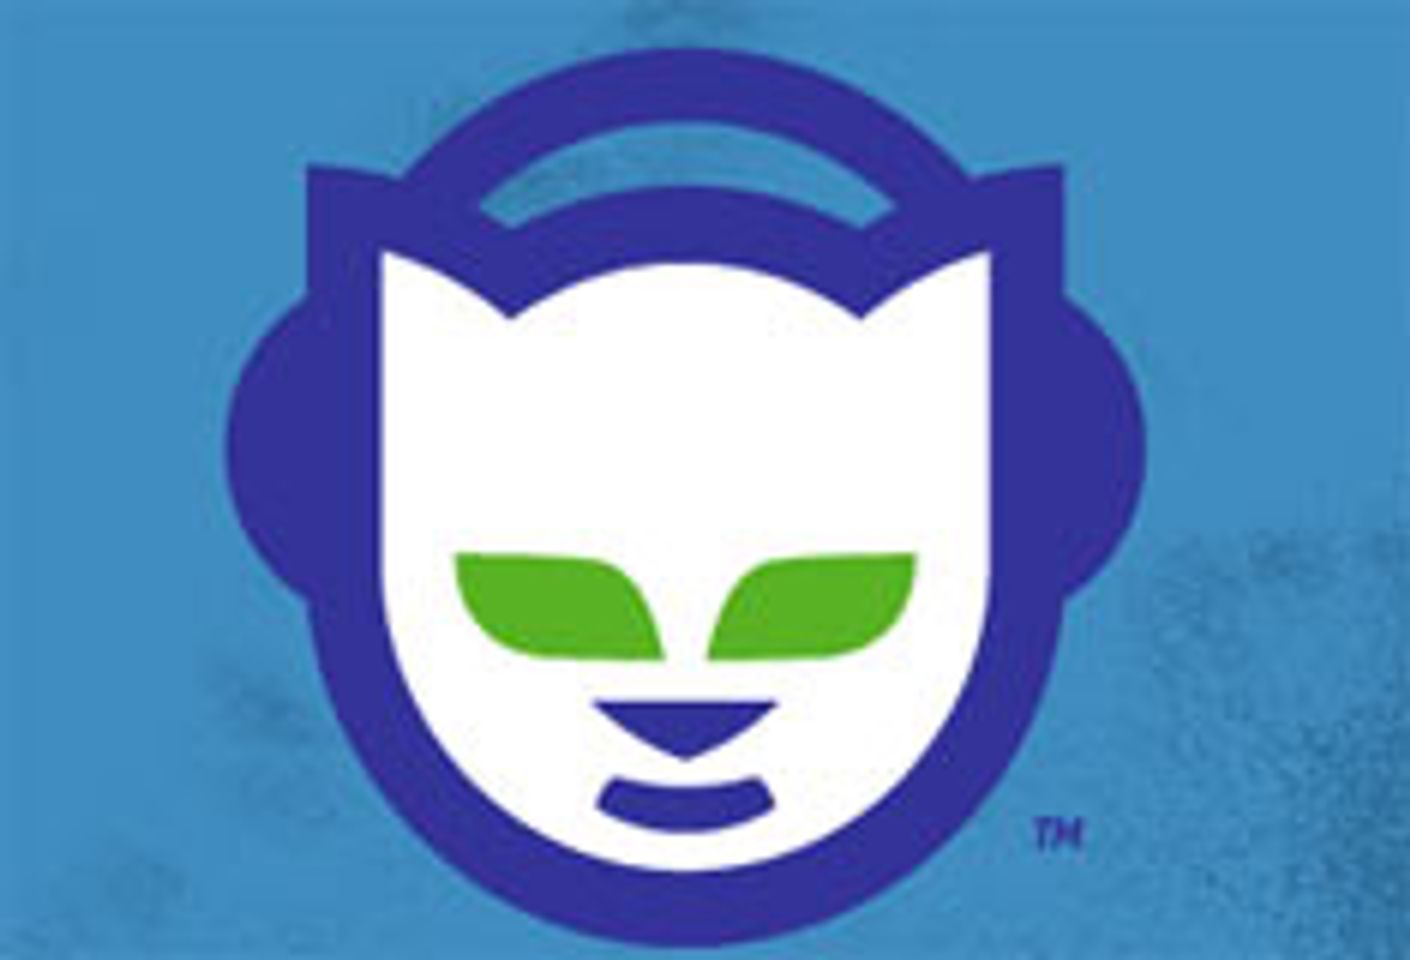 Meet The New, "Legal" Napster &#8211; In A Crowded Field